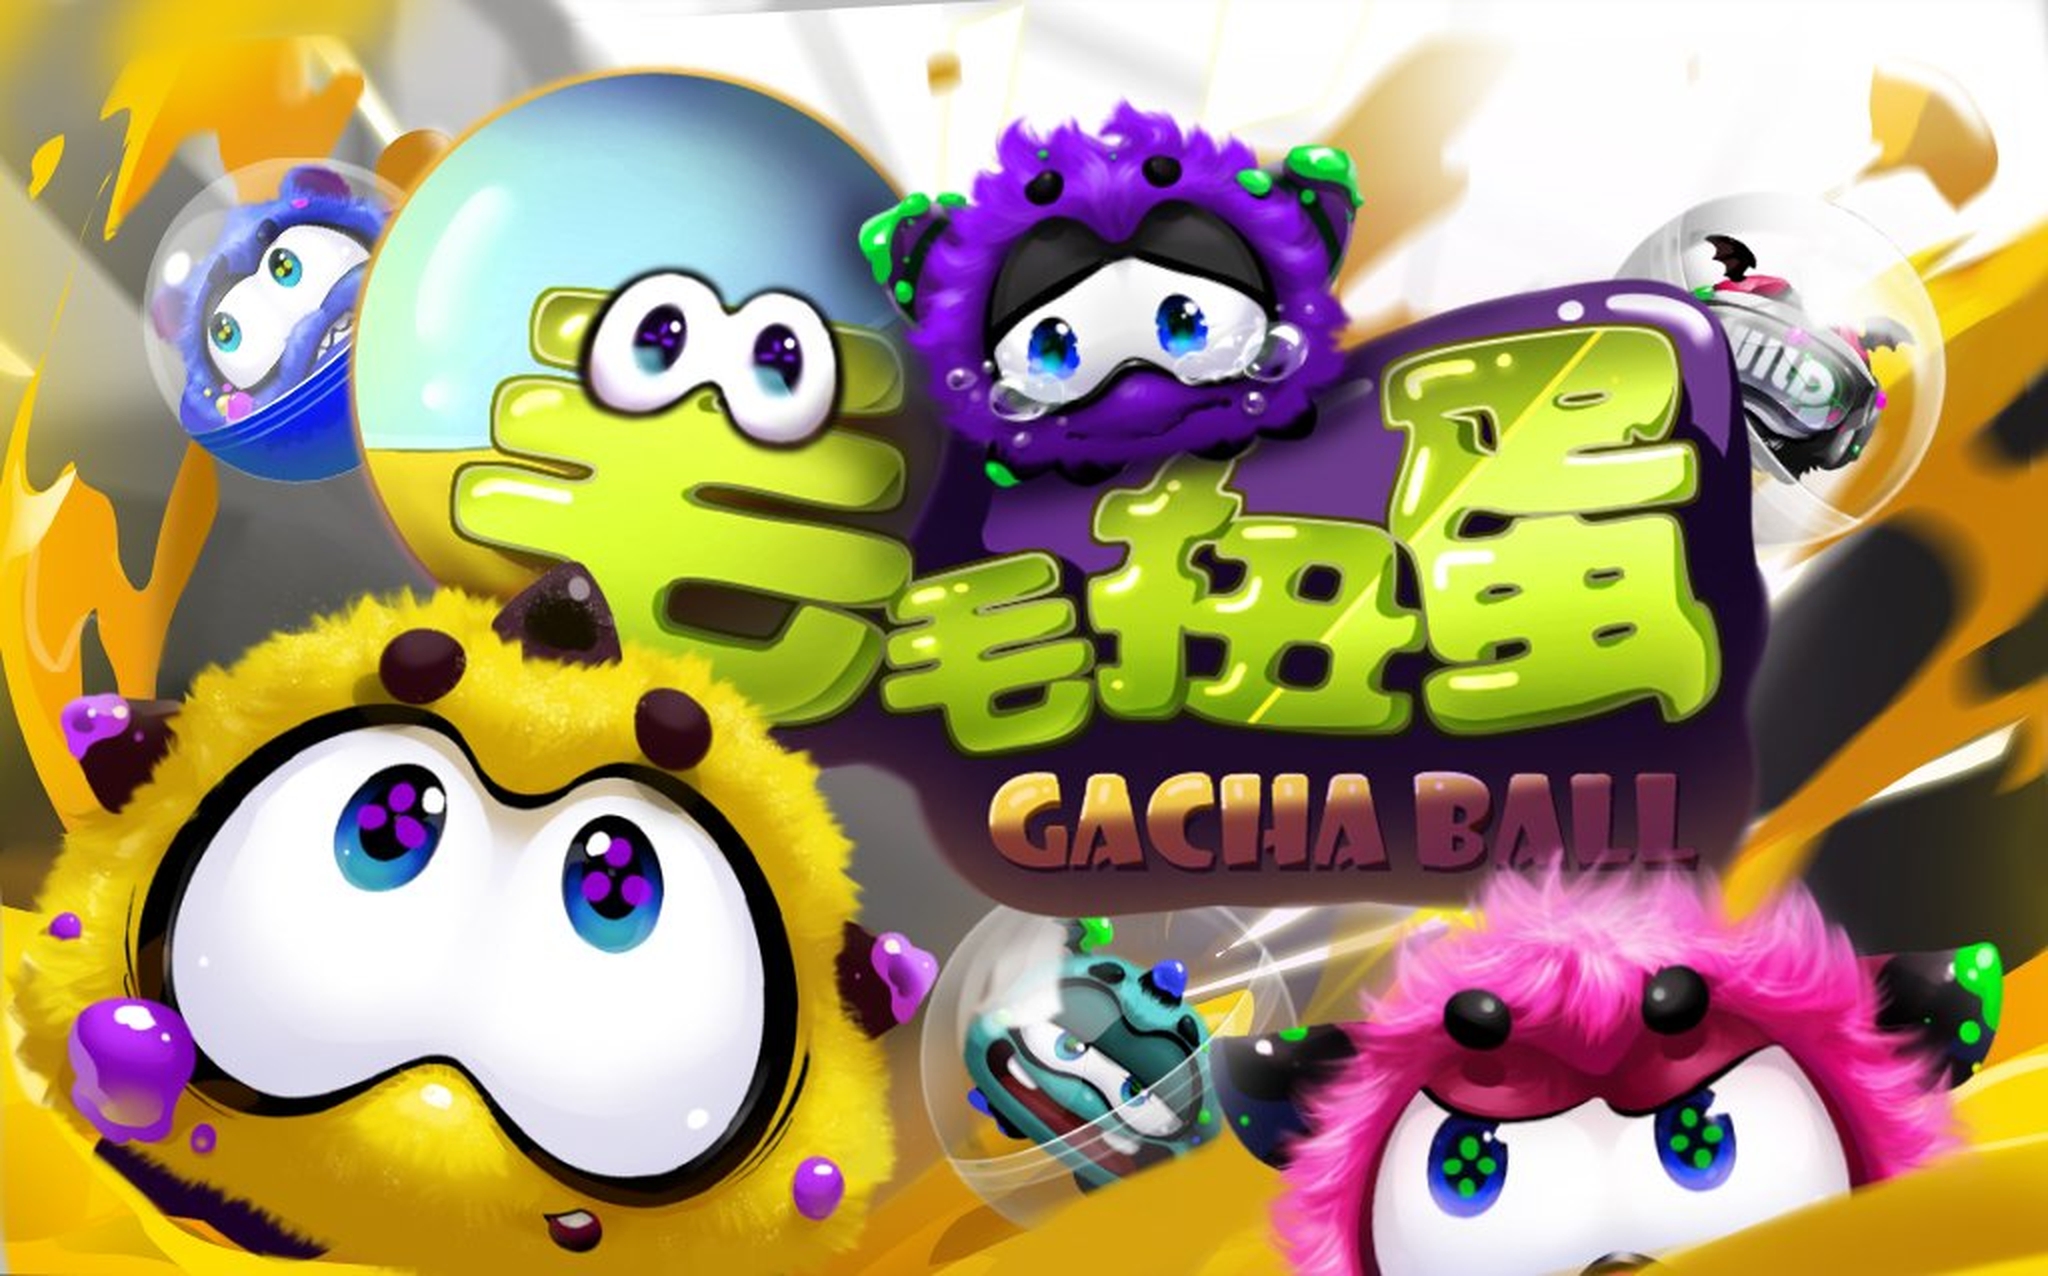 The Gacha Ball Online Slot Demo Game by AllWaySpin